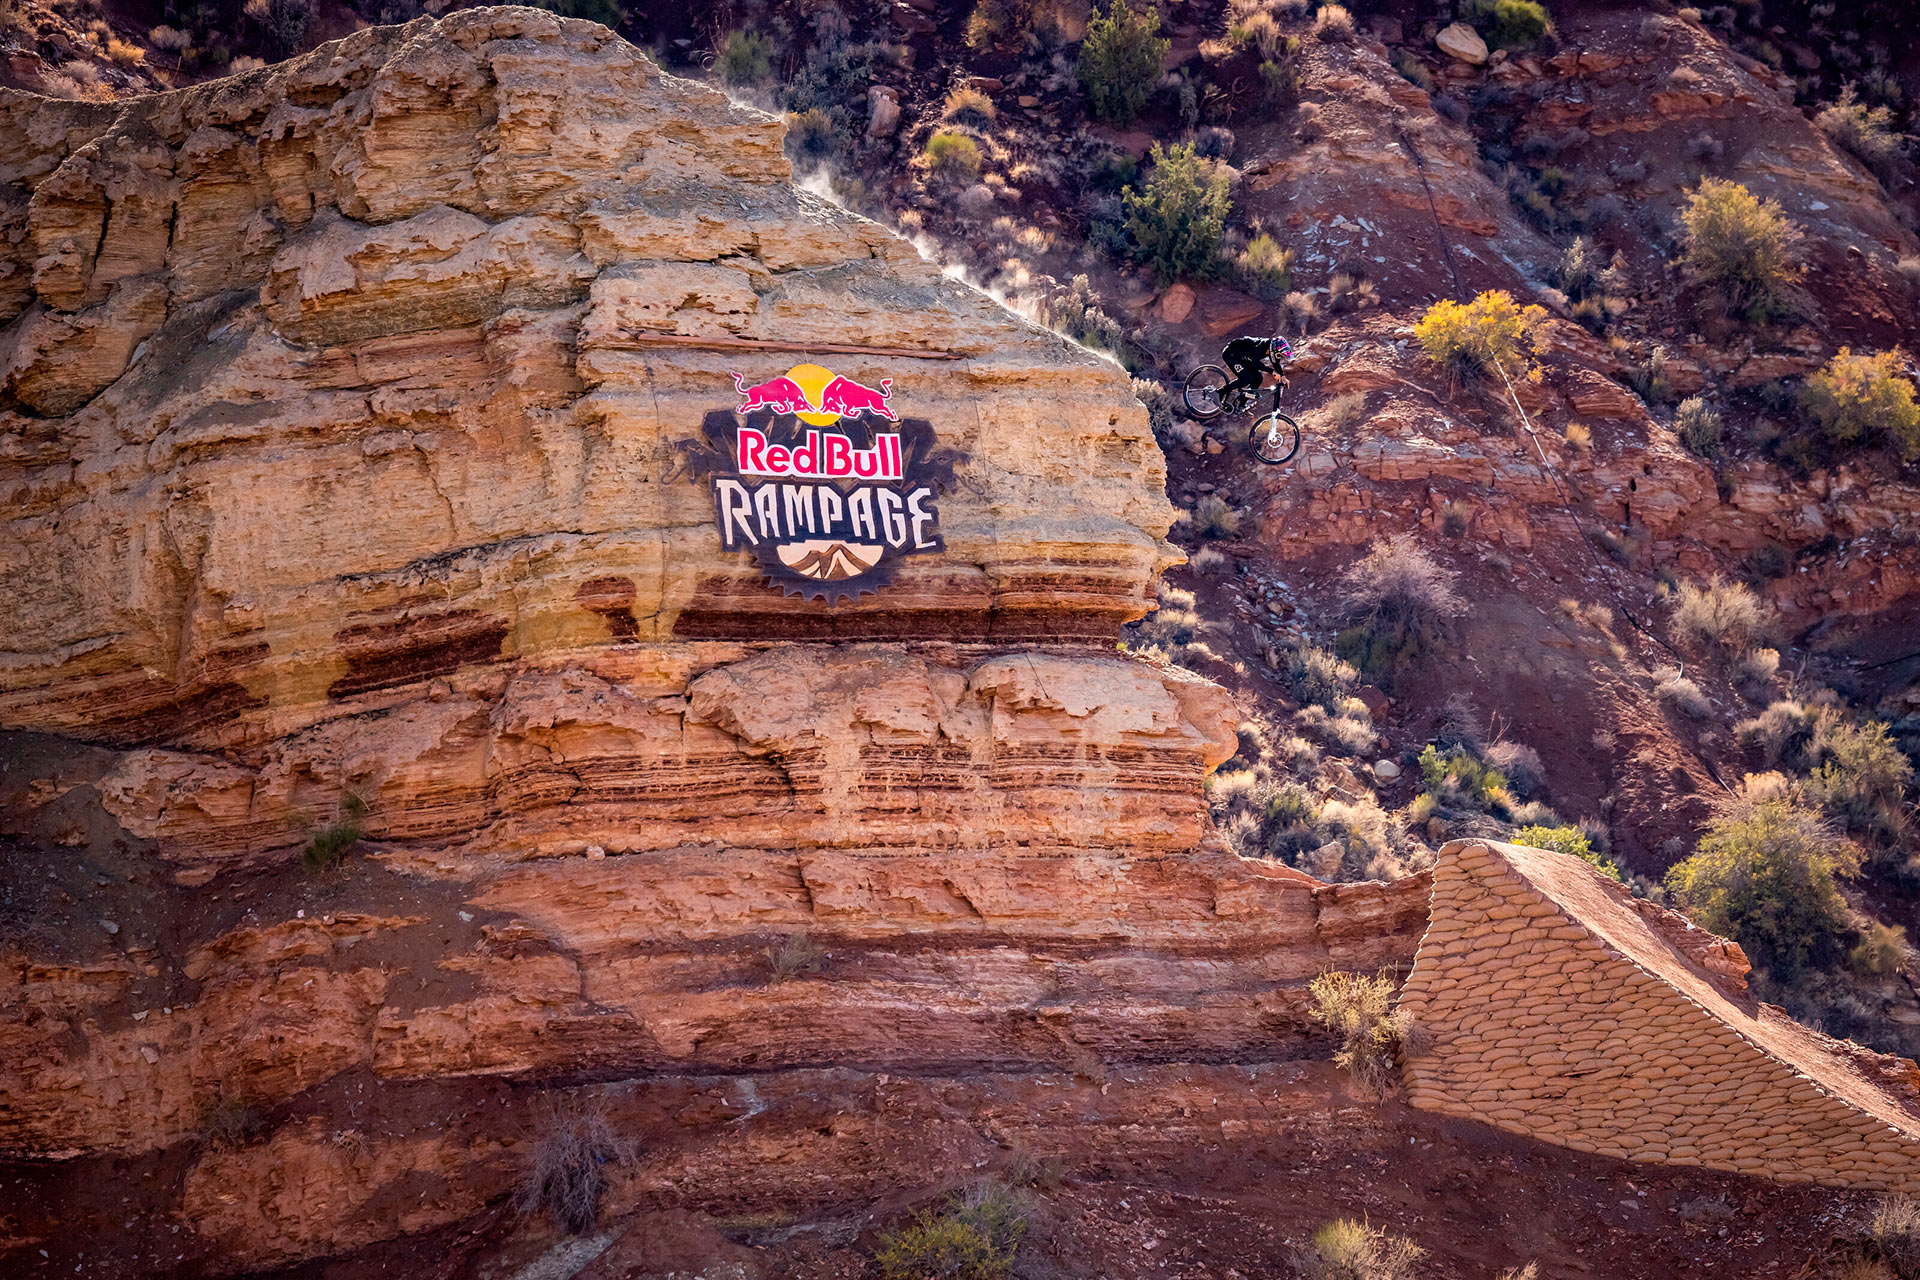 Red Bull Rampage 2021- Reed Boggs